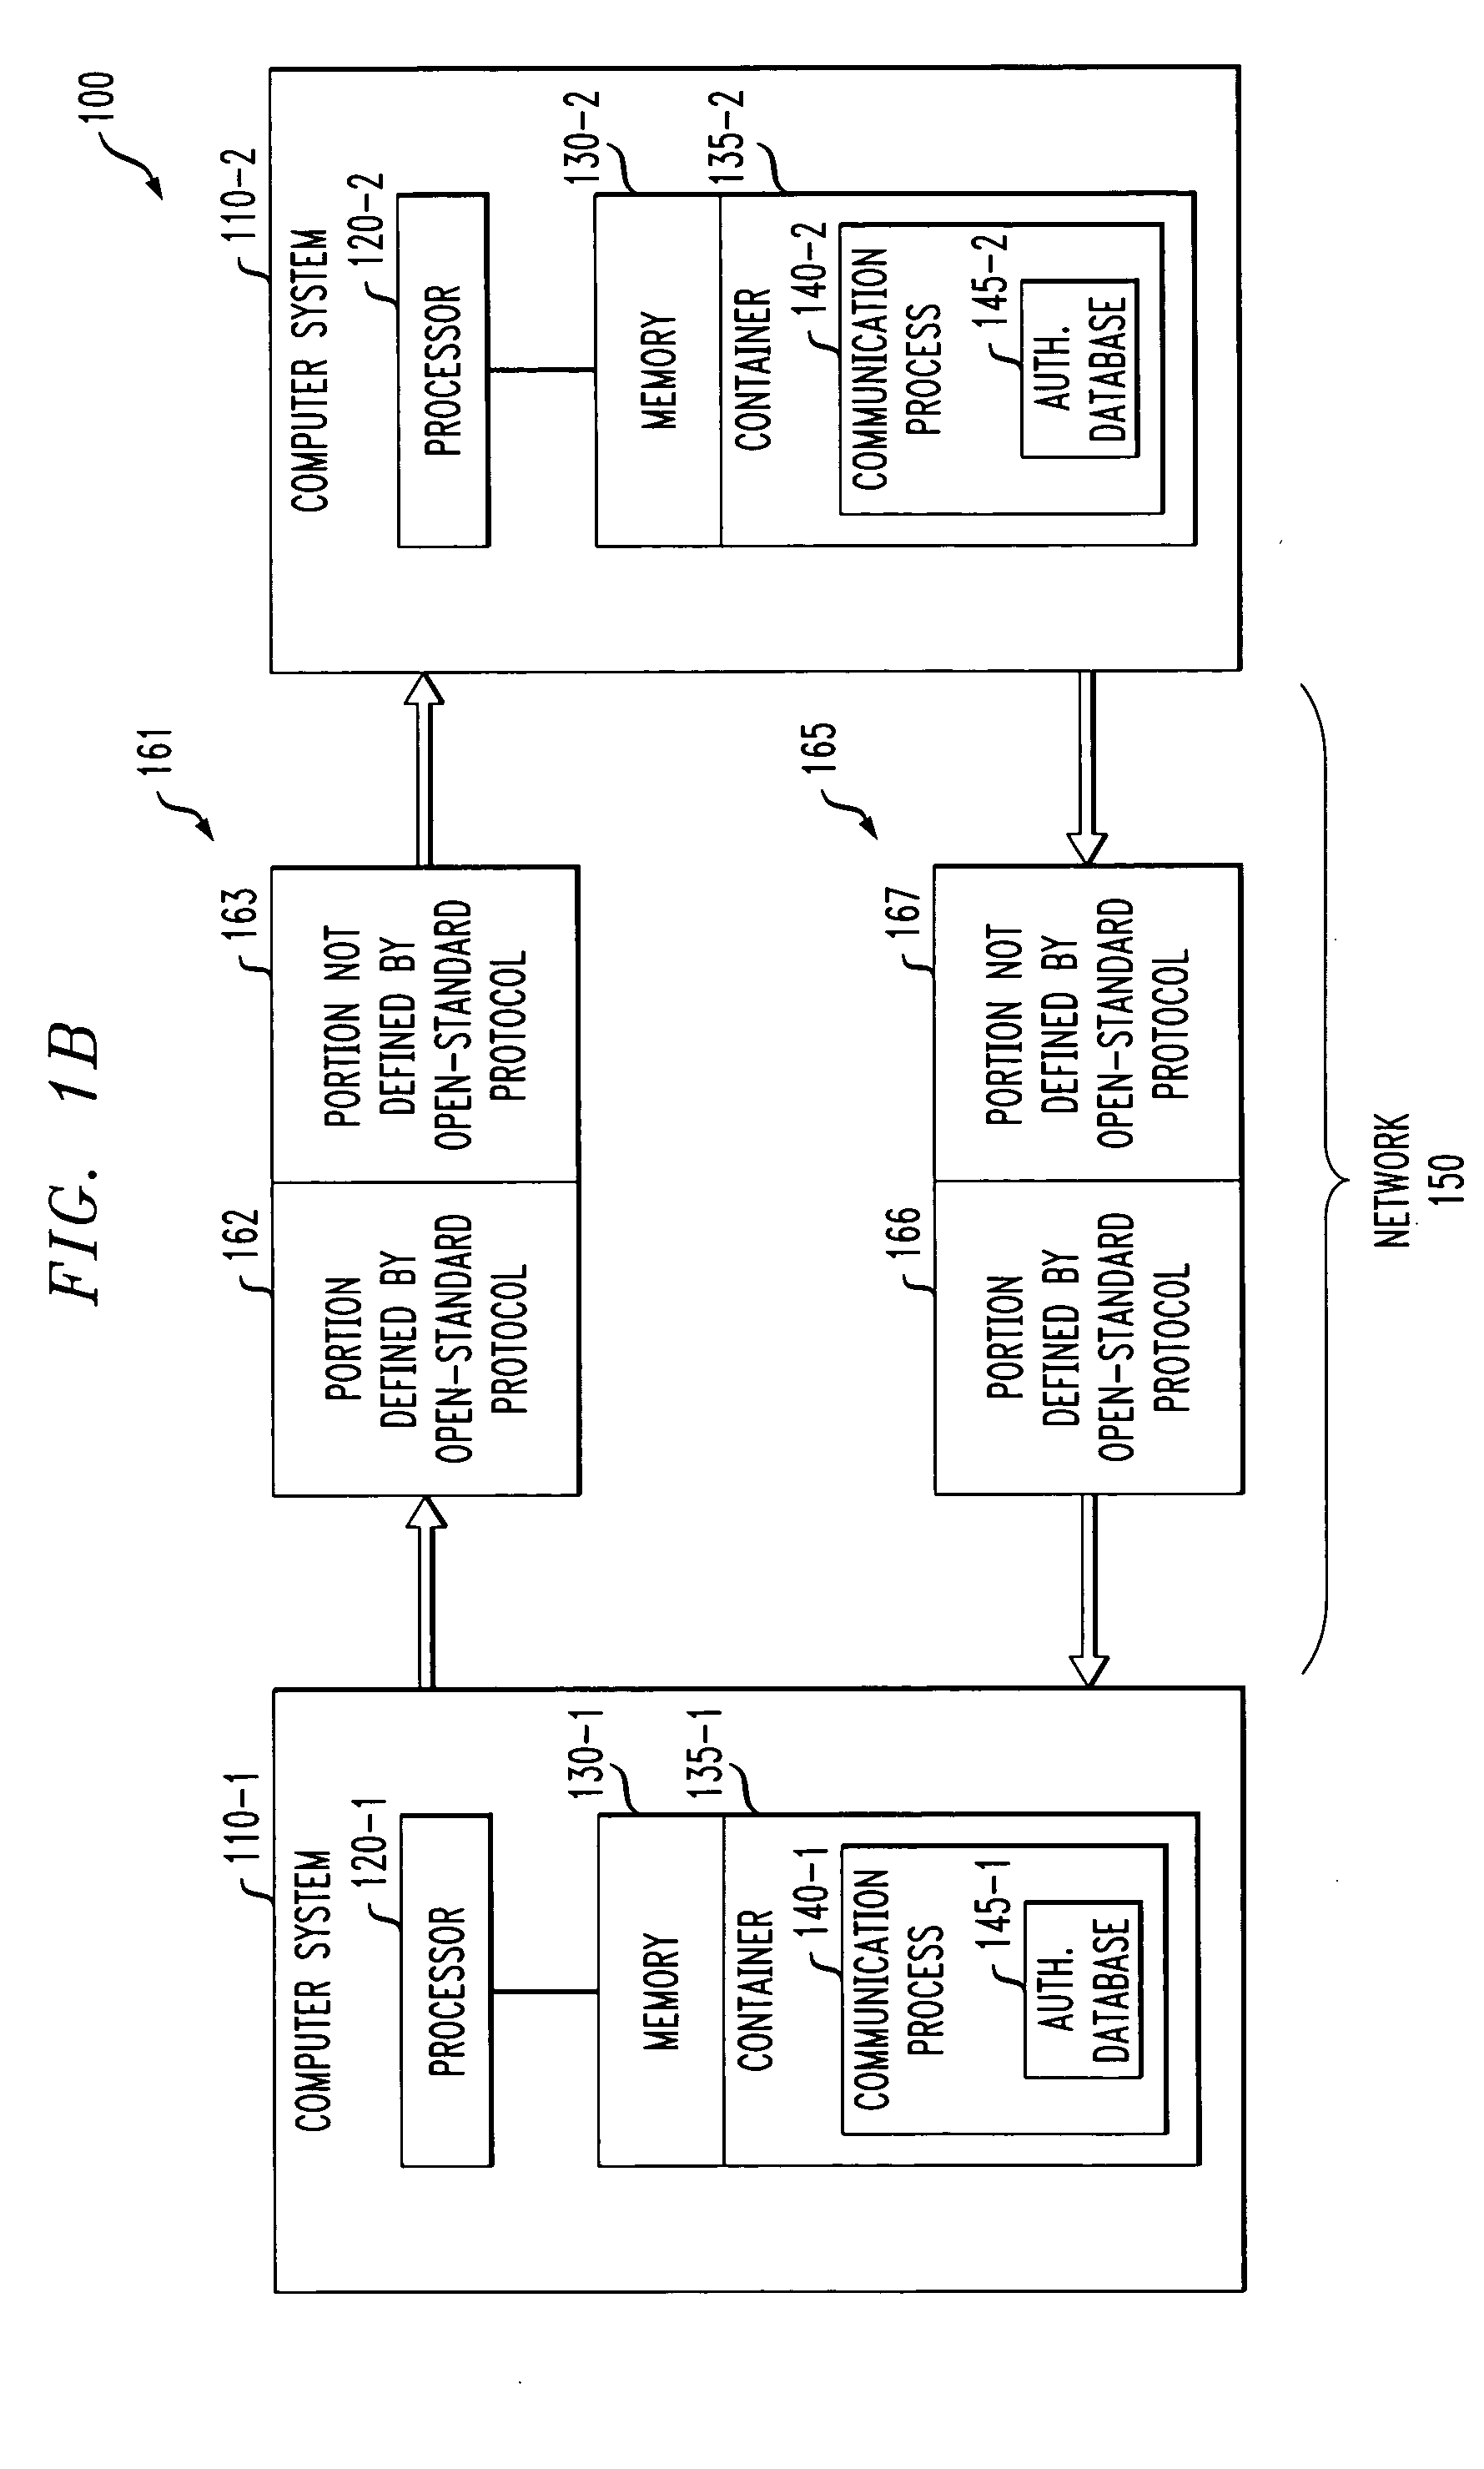 Transparent coupling between compatible containers communicating over networks